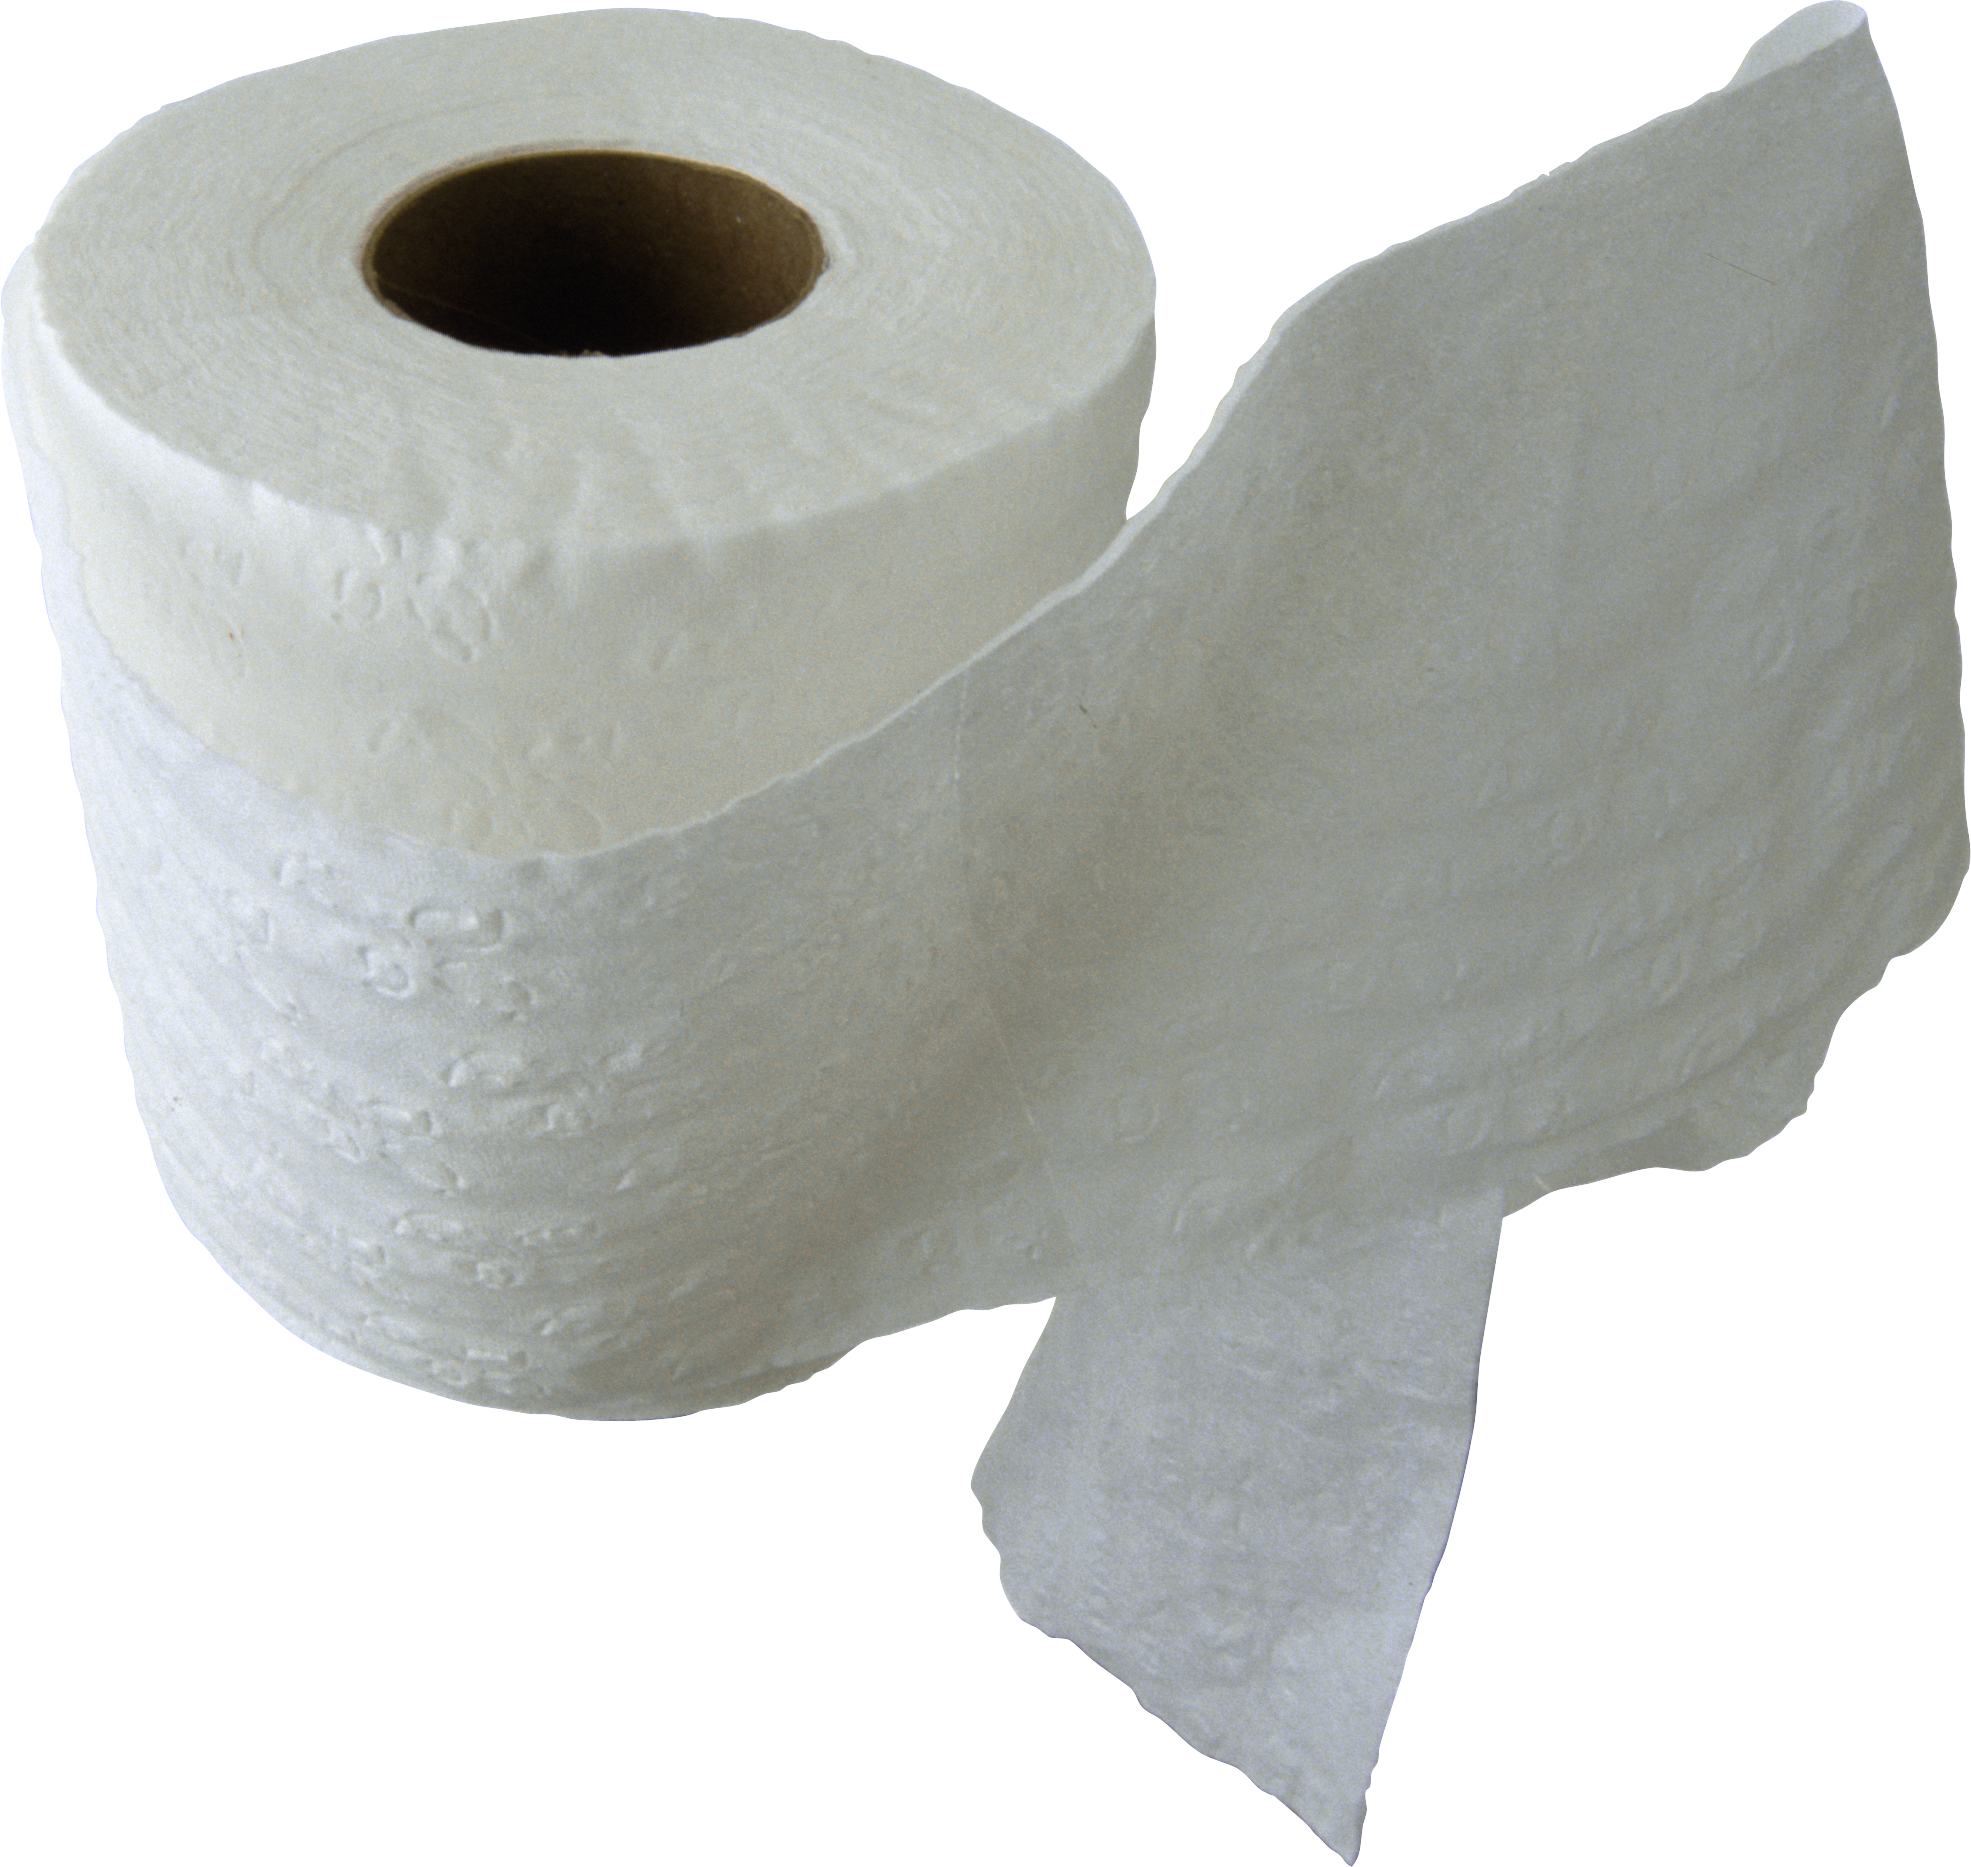 Toilet paper - A roll of toil